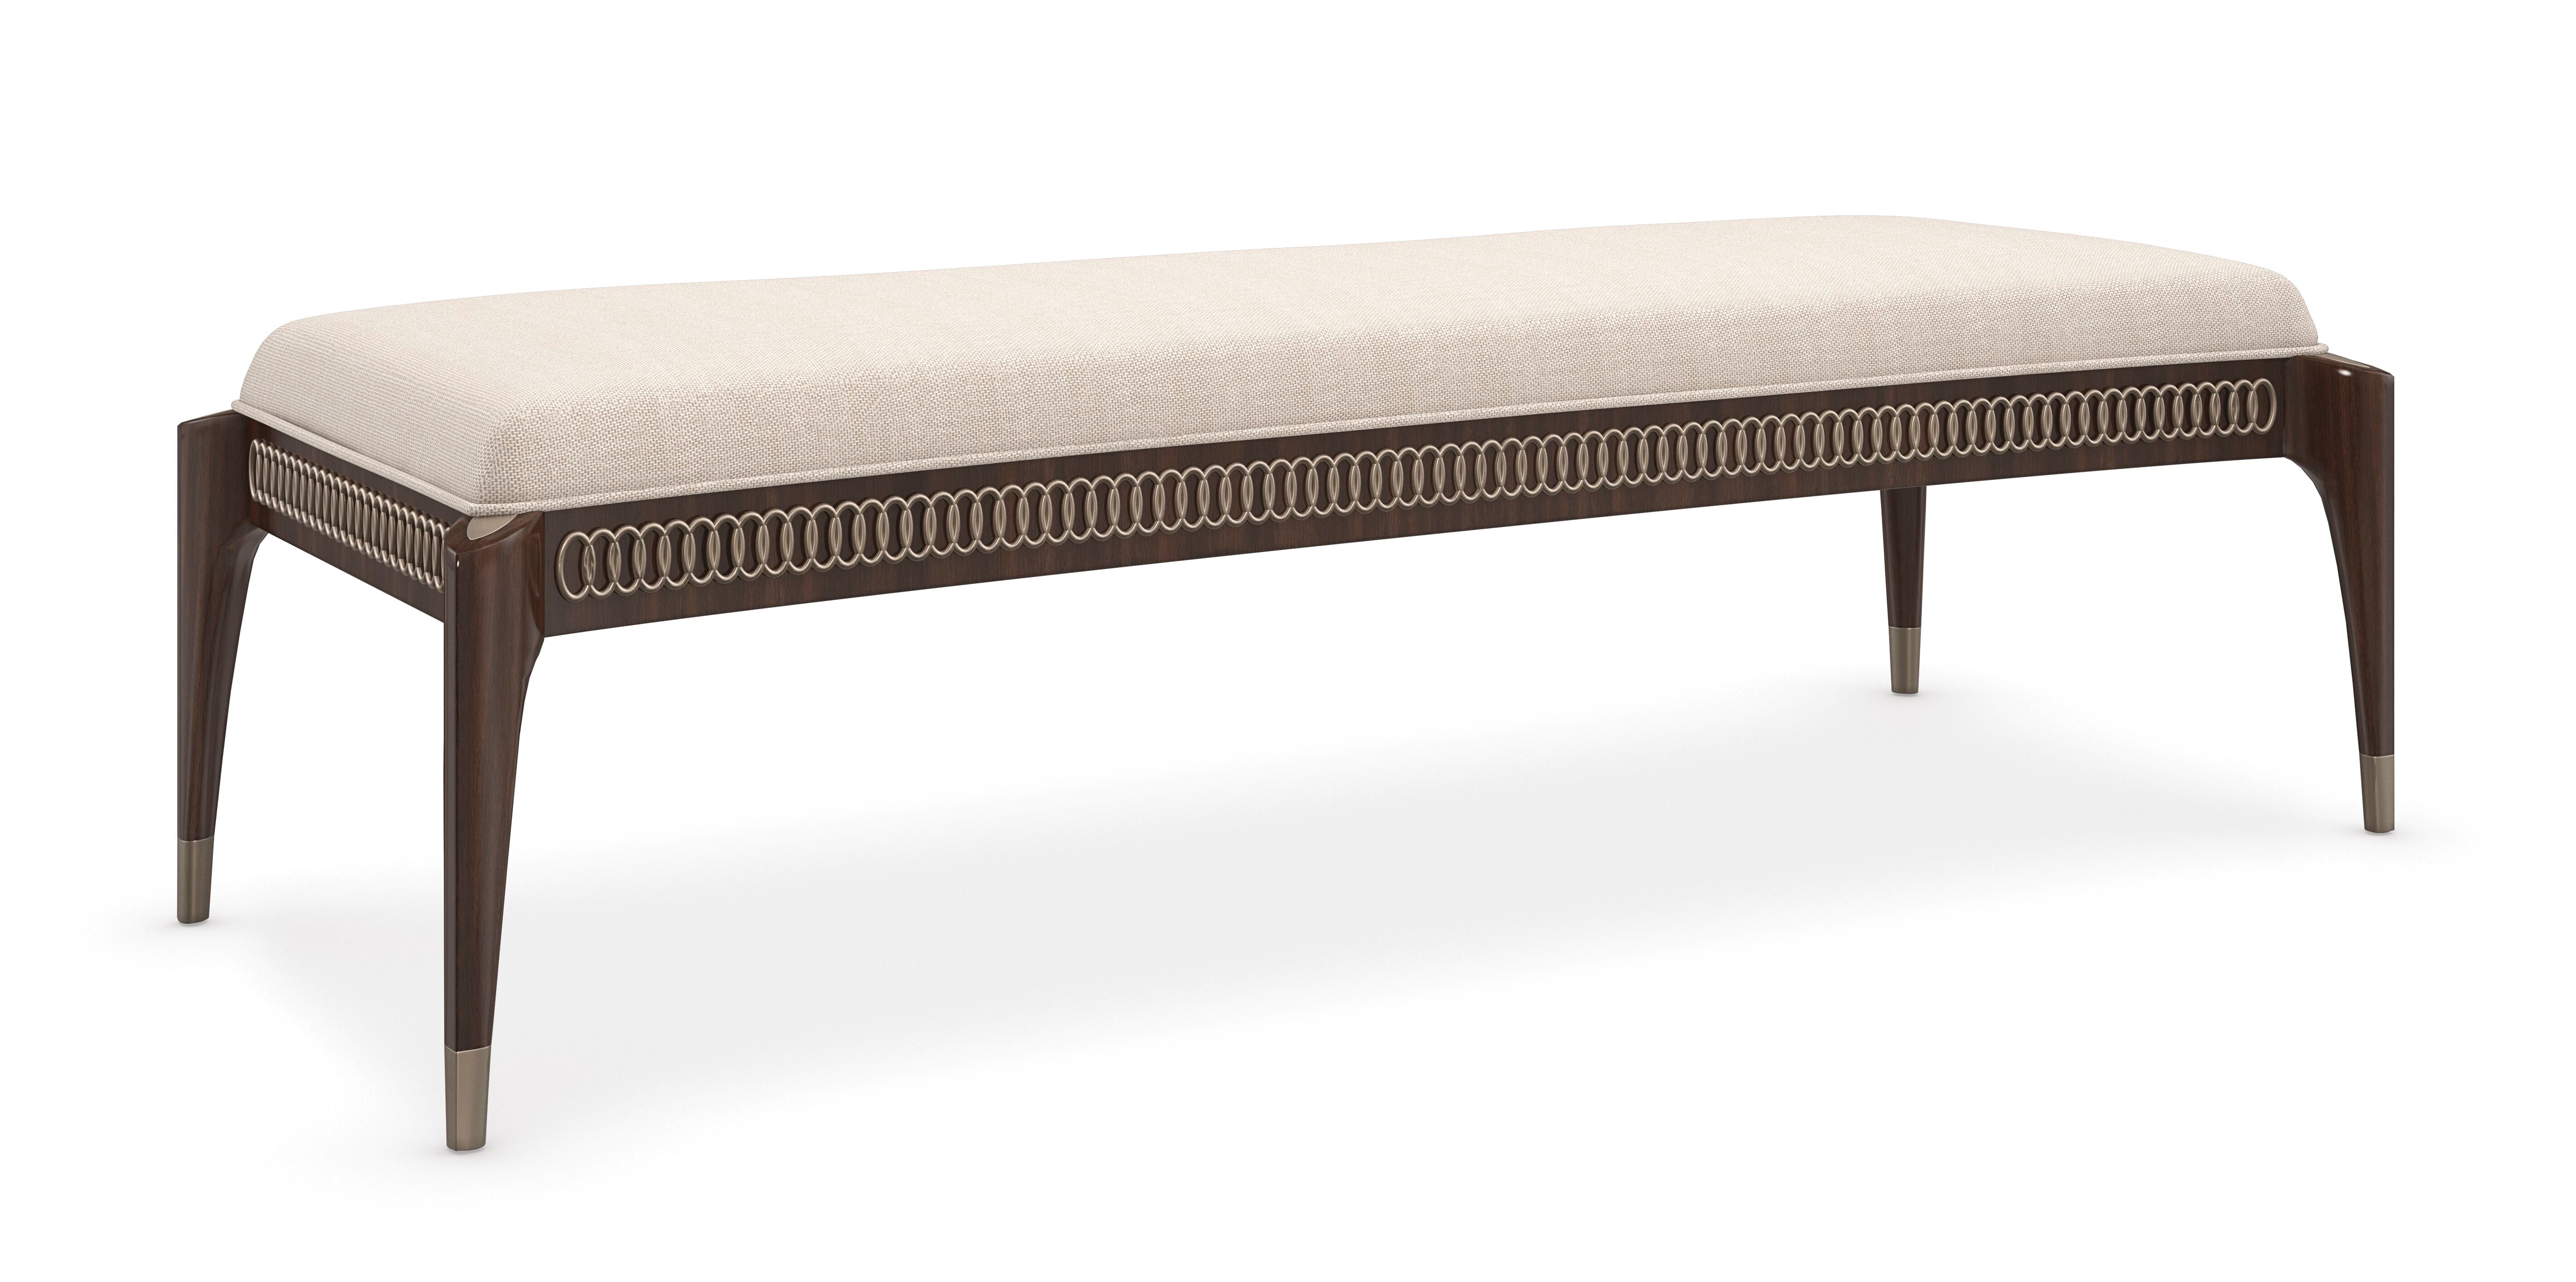 Dark Wood Bed Bench | Caracole The Oxford | Oroa.com